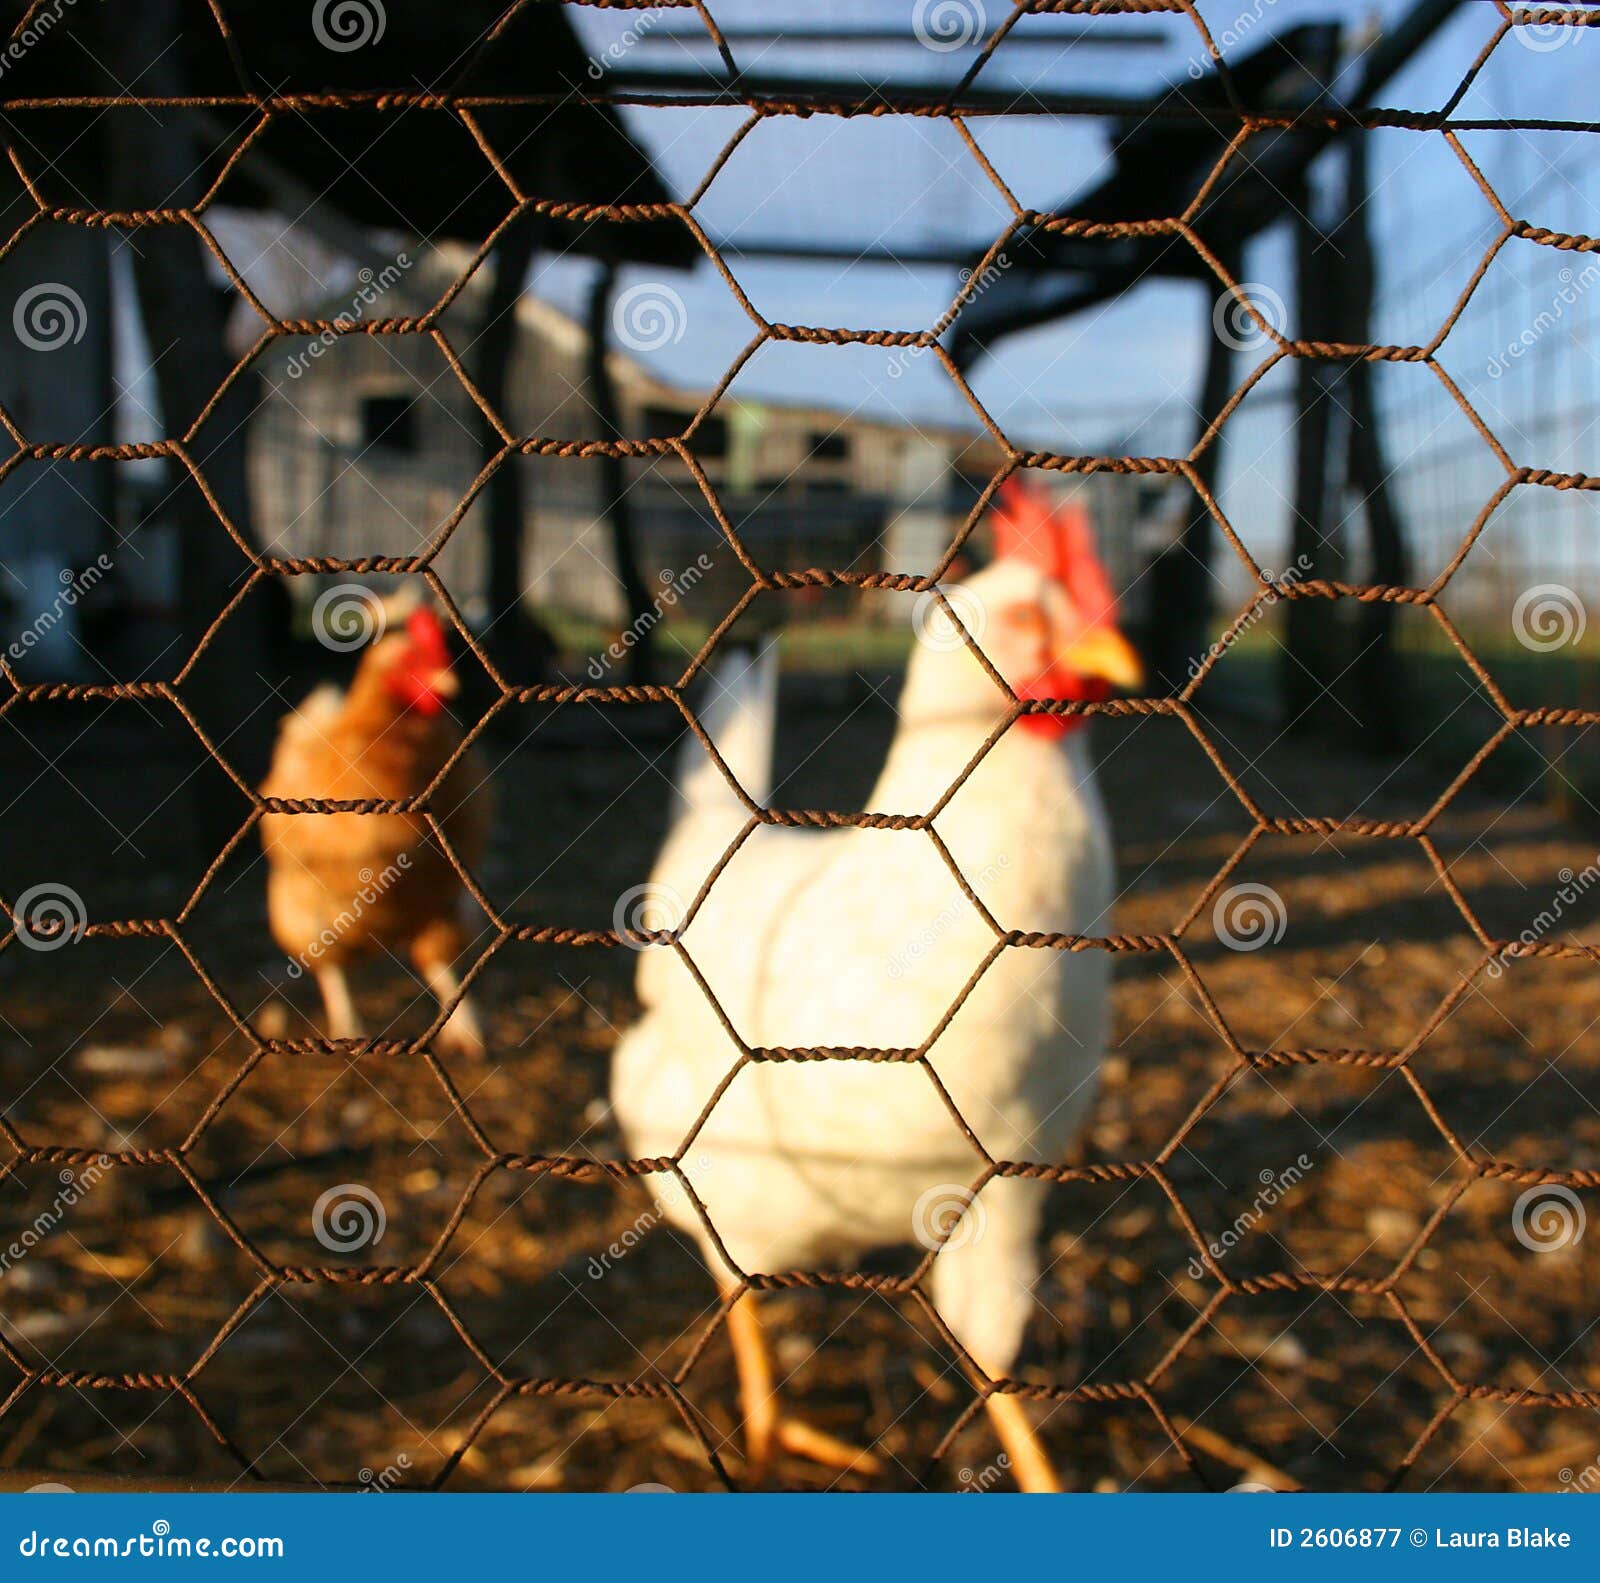 8+ Thousand Chicken Wire Royalty-Free Images, Stock Photos & Pictures